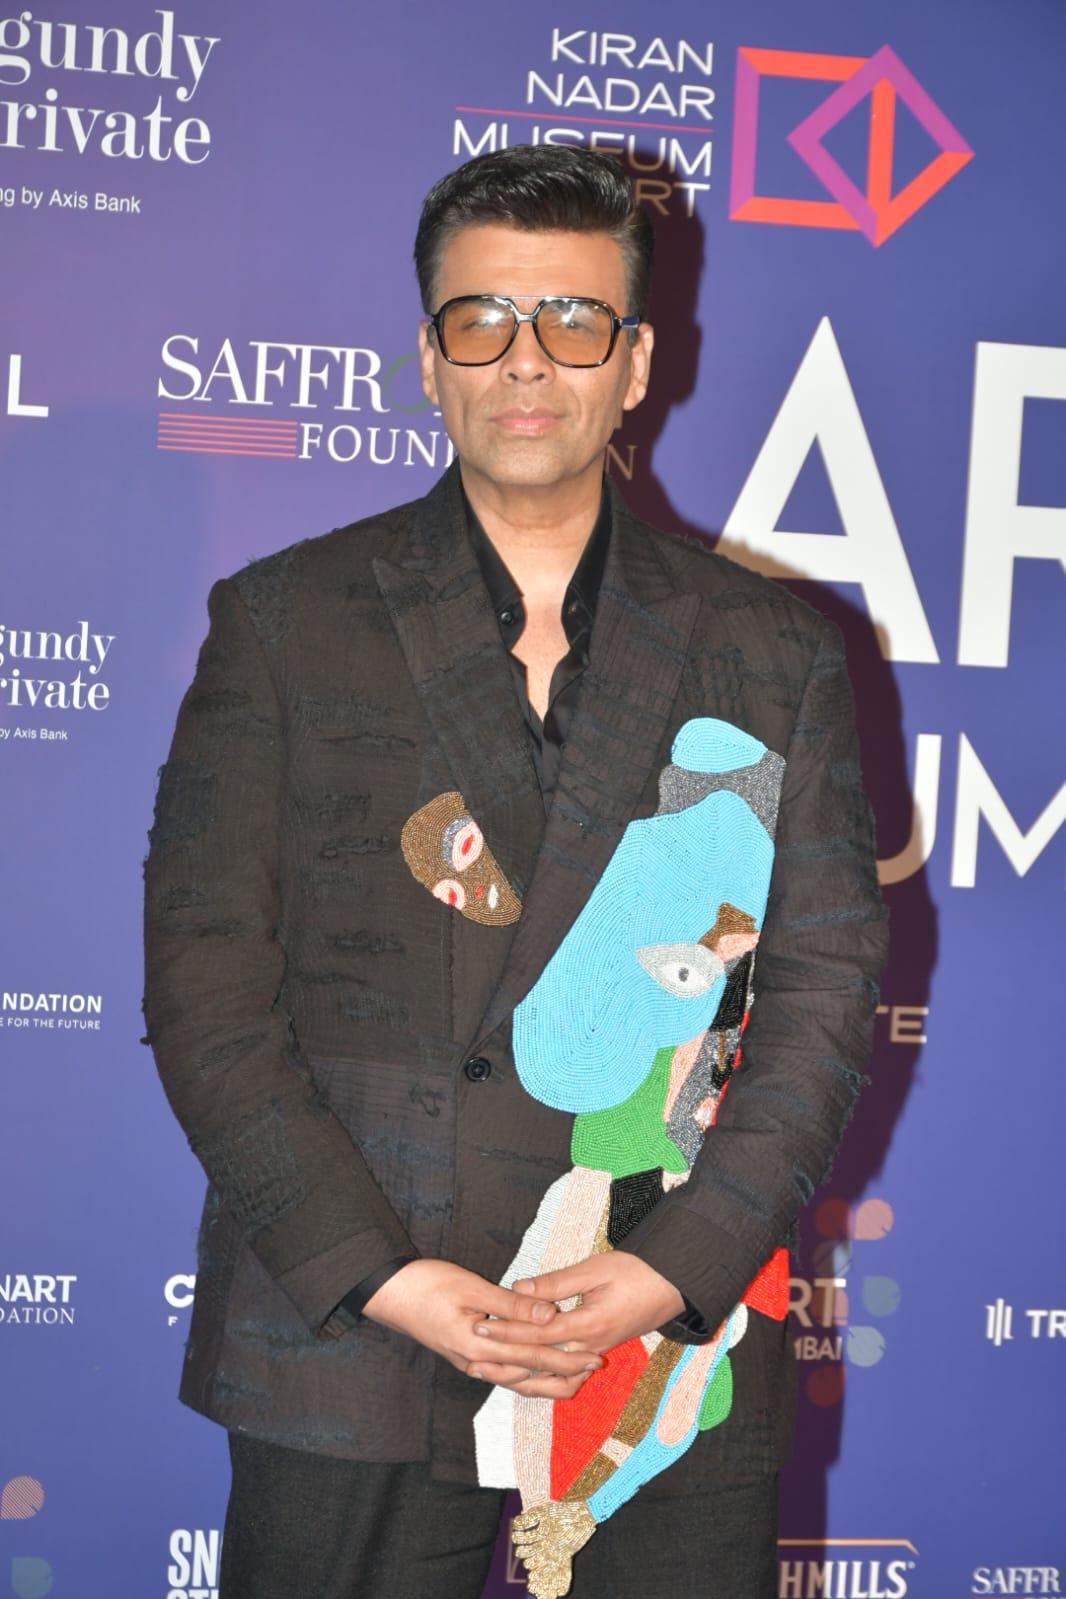 The host, Karan Johar, dazzled in a dapper black suit with some colourful designs on the jacket that added a delightful twist to the ensemble